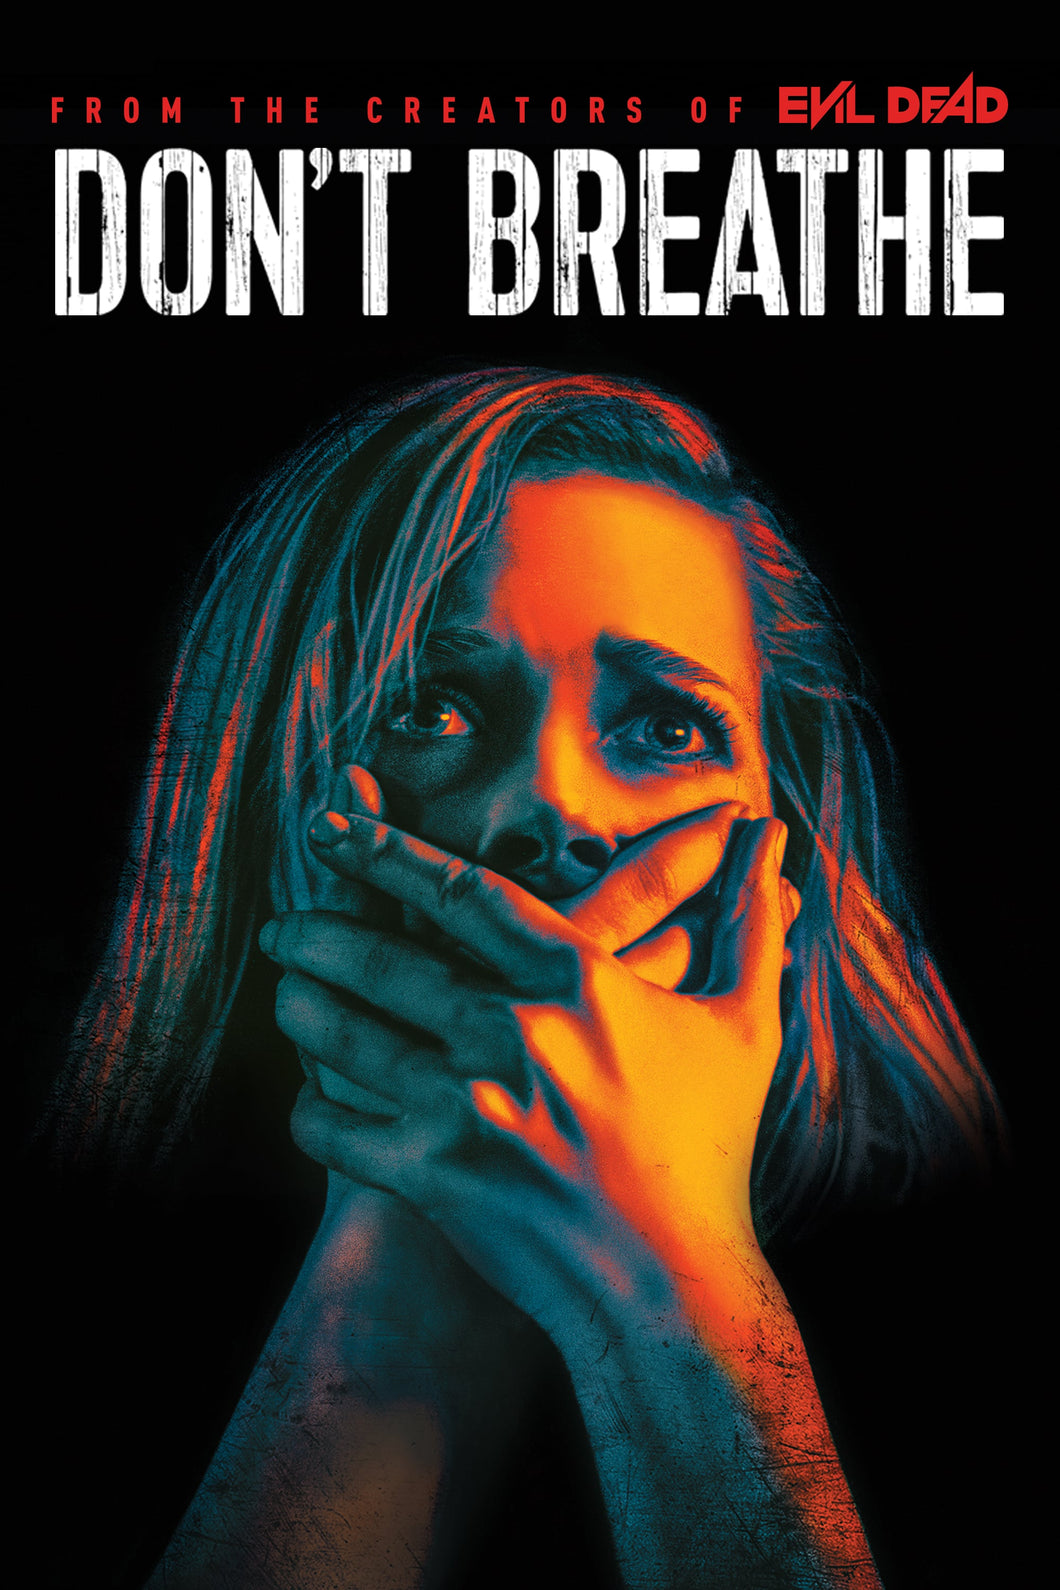 Don_t Breathe (2016) Movie Poster High Quality Glossy Paper A1 A2 A3 A4 A3 Framed or Unframed!!!